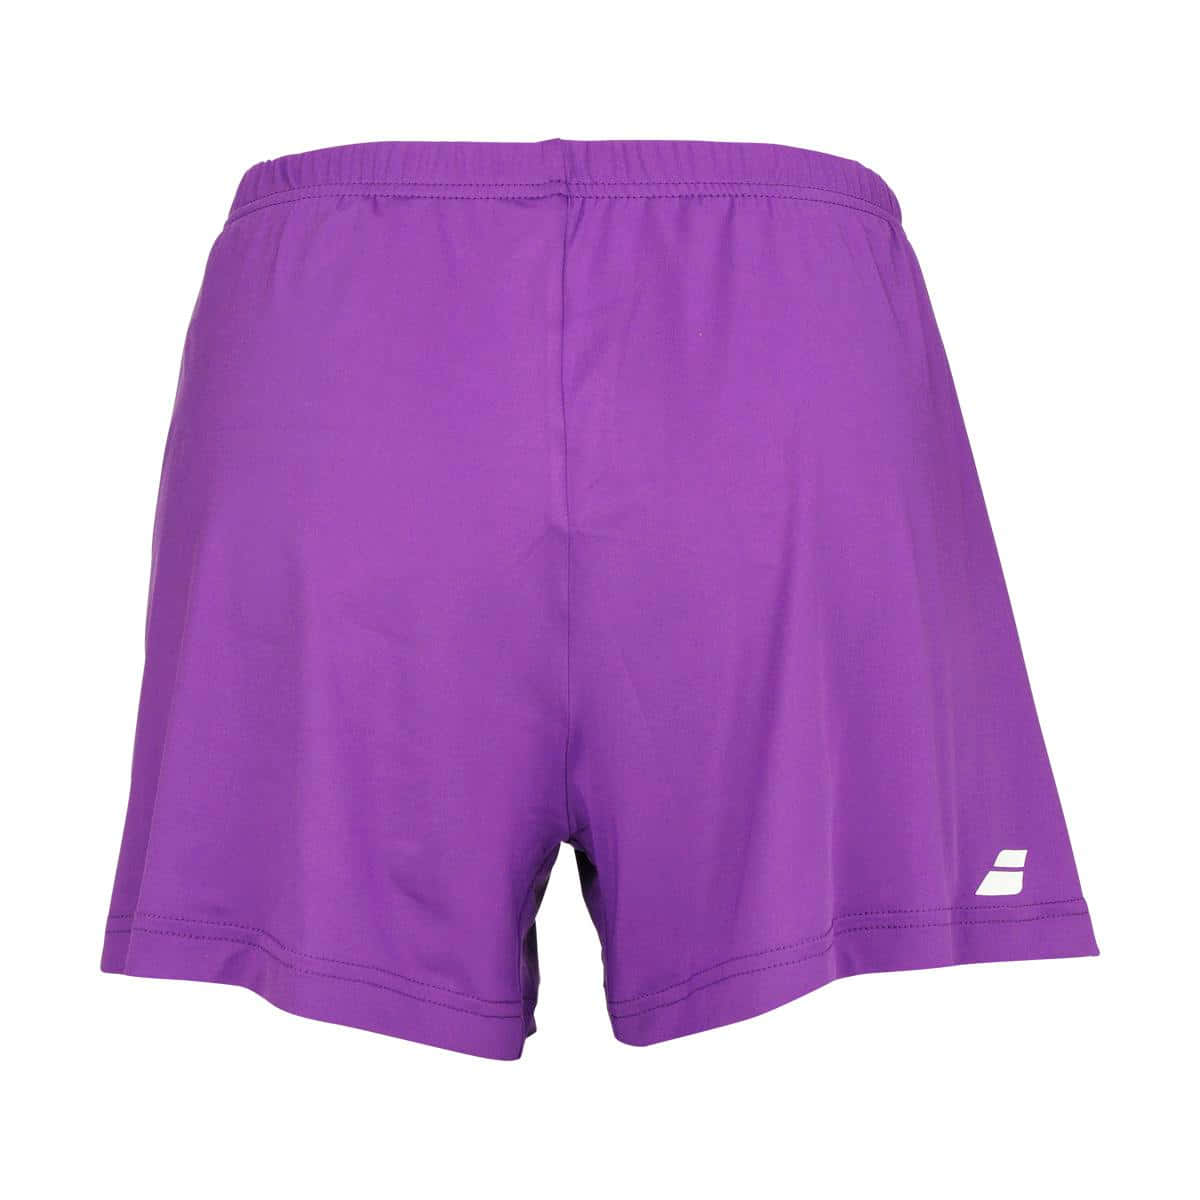 Enjoy The Summer with a stylish pair of purple Shorts Wallpaper